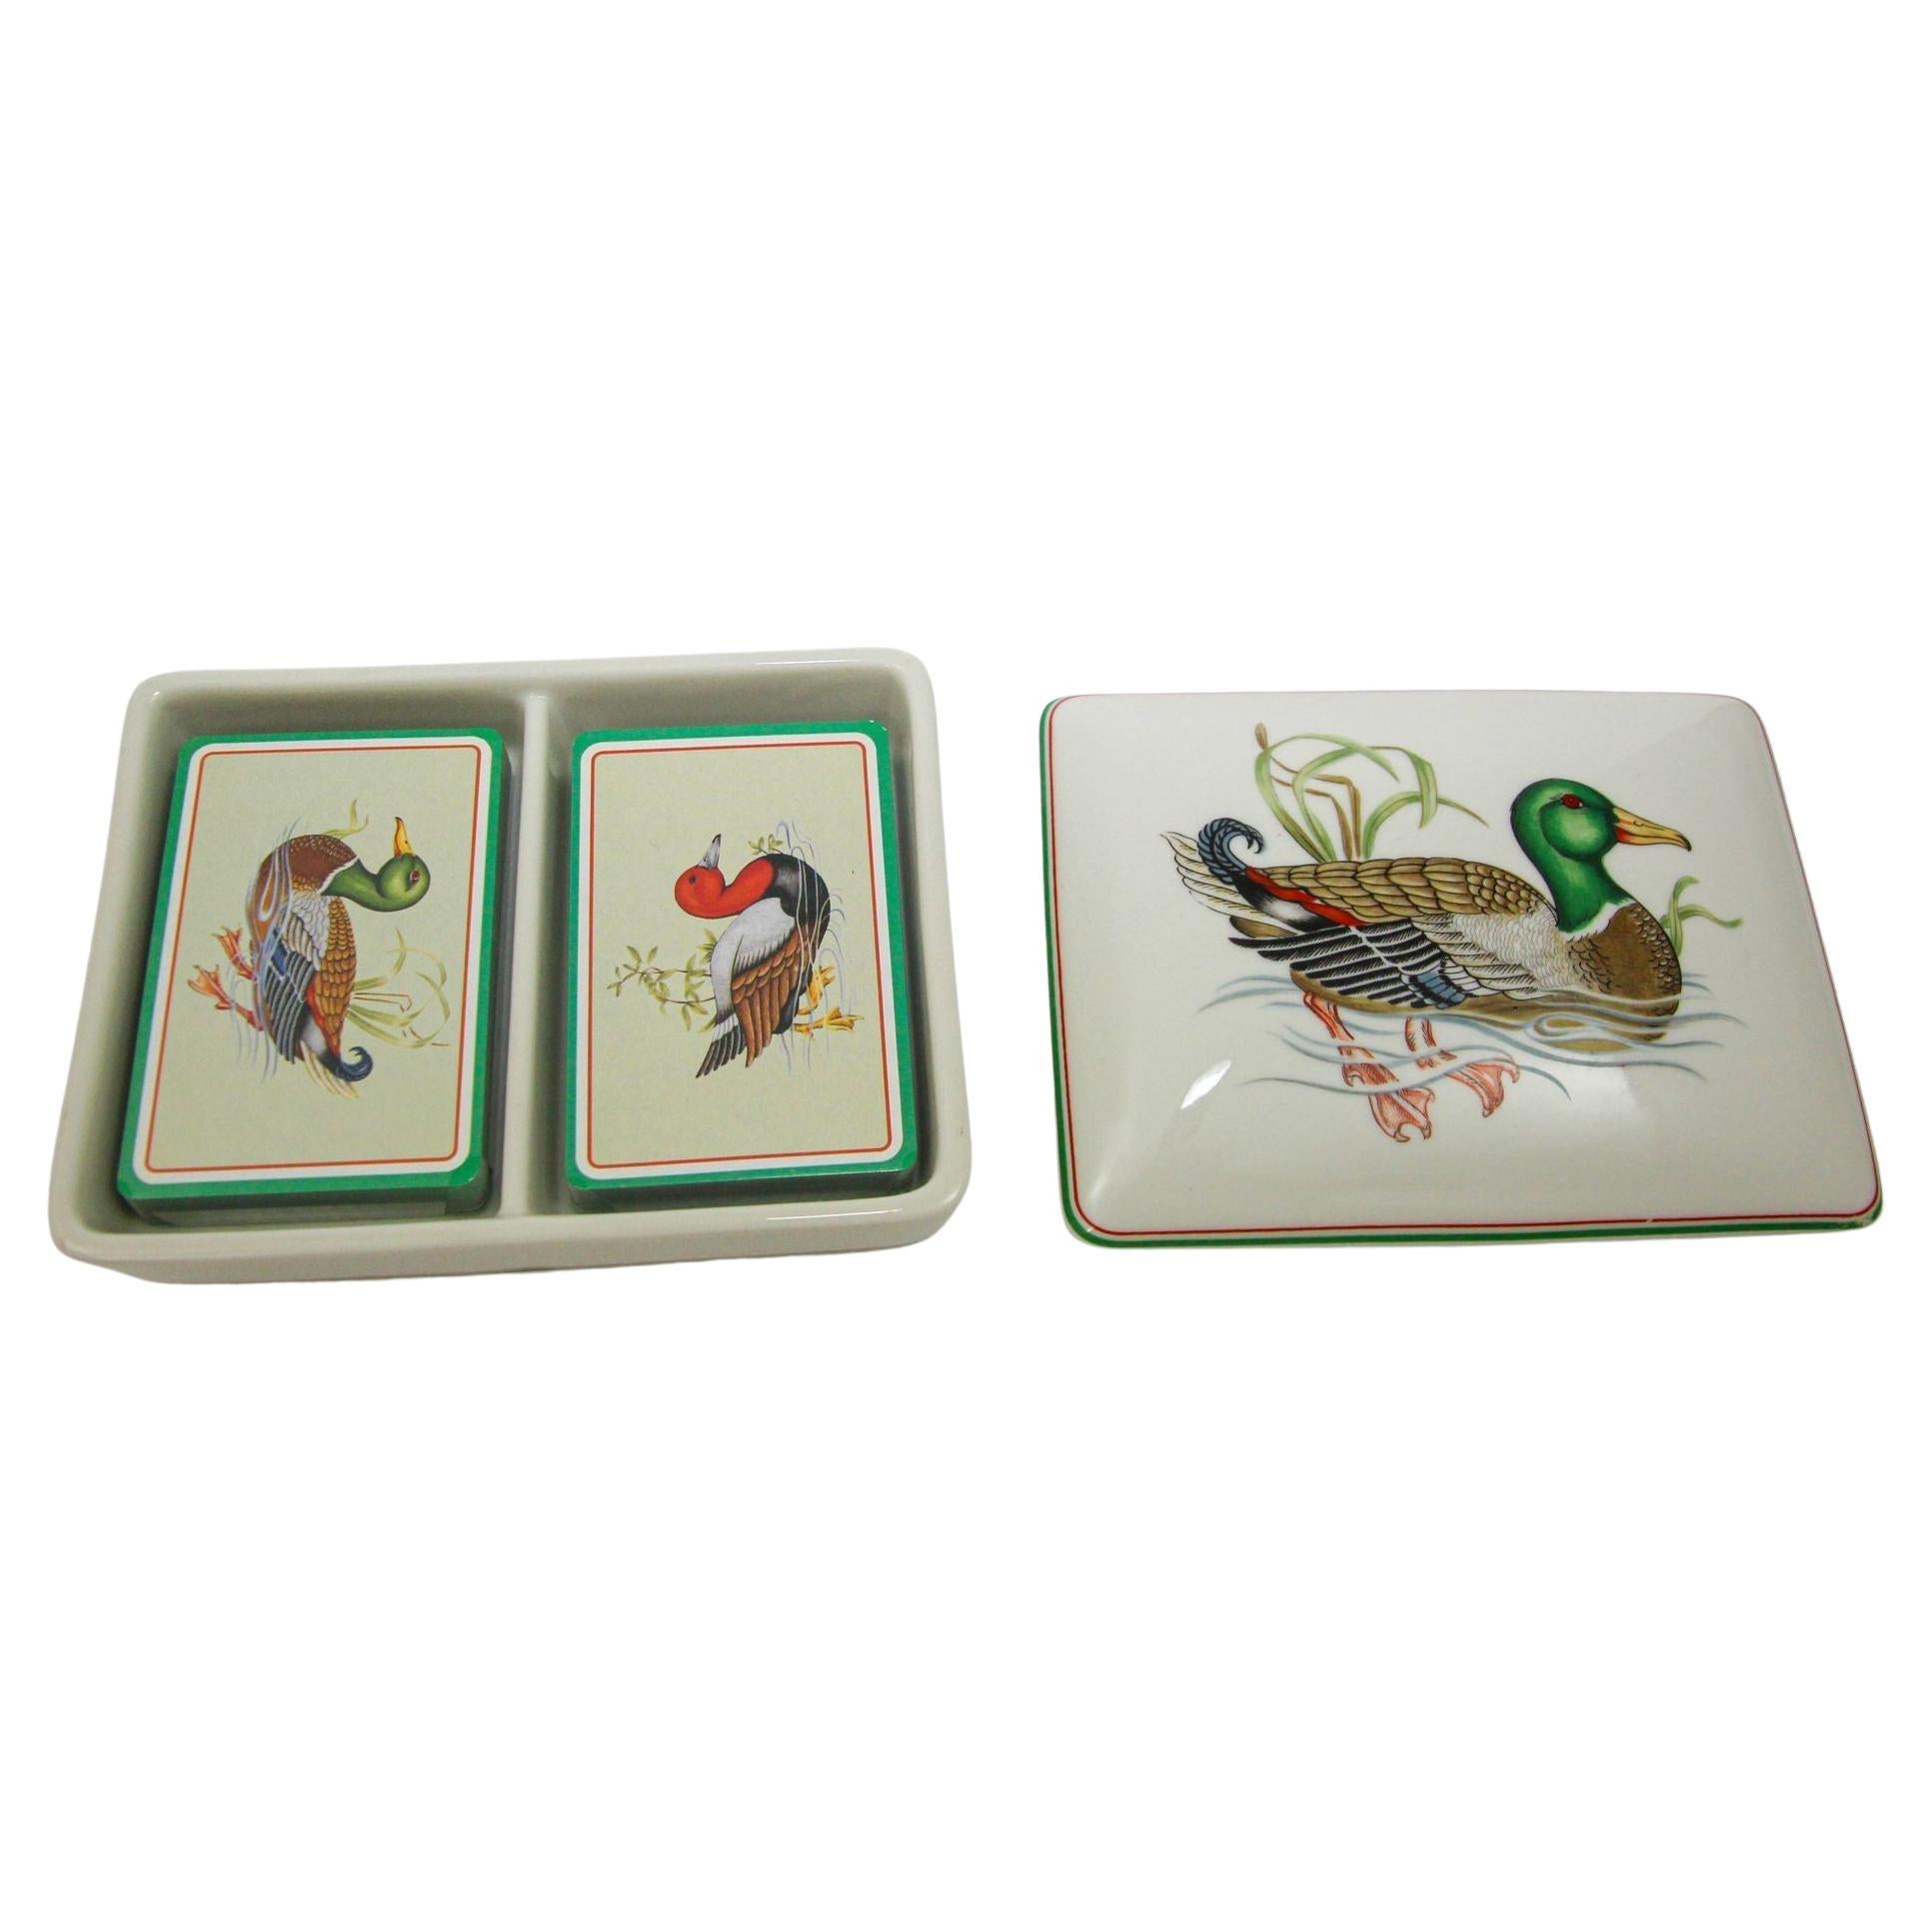 Fitz and Floyd Porcelain Box with Bridge Playing Cards 1980 Japan For Sale